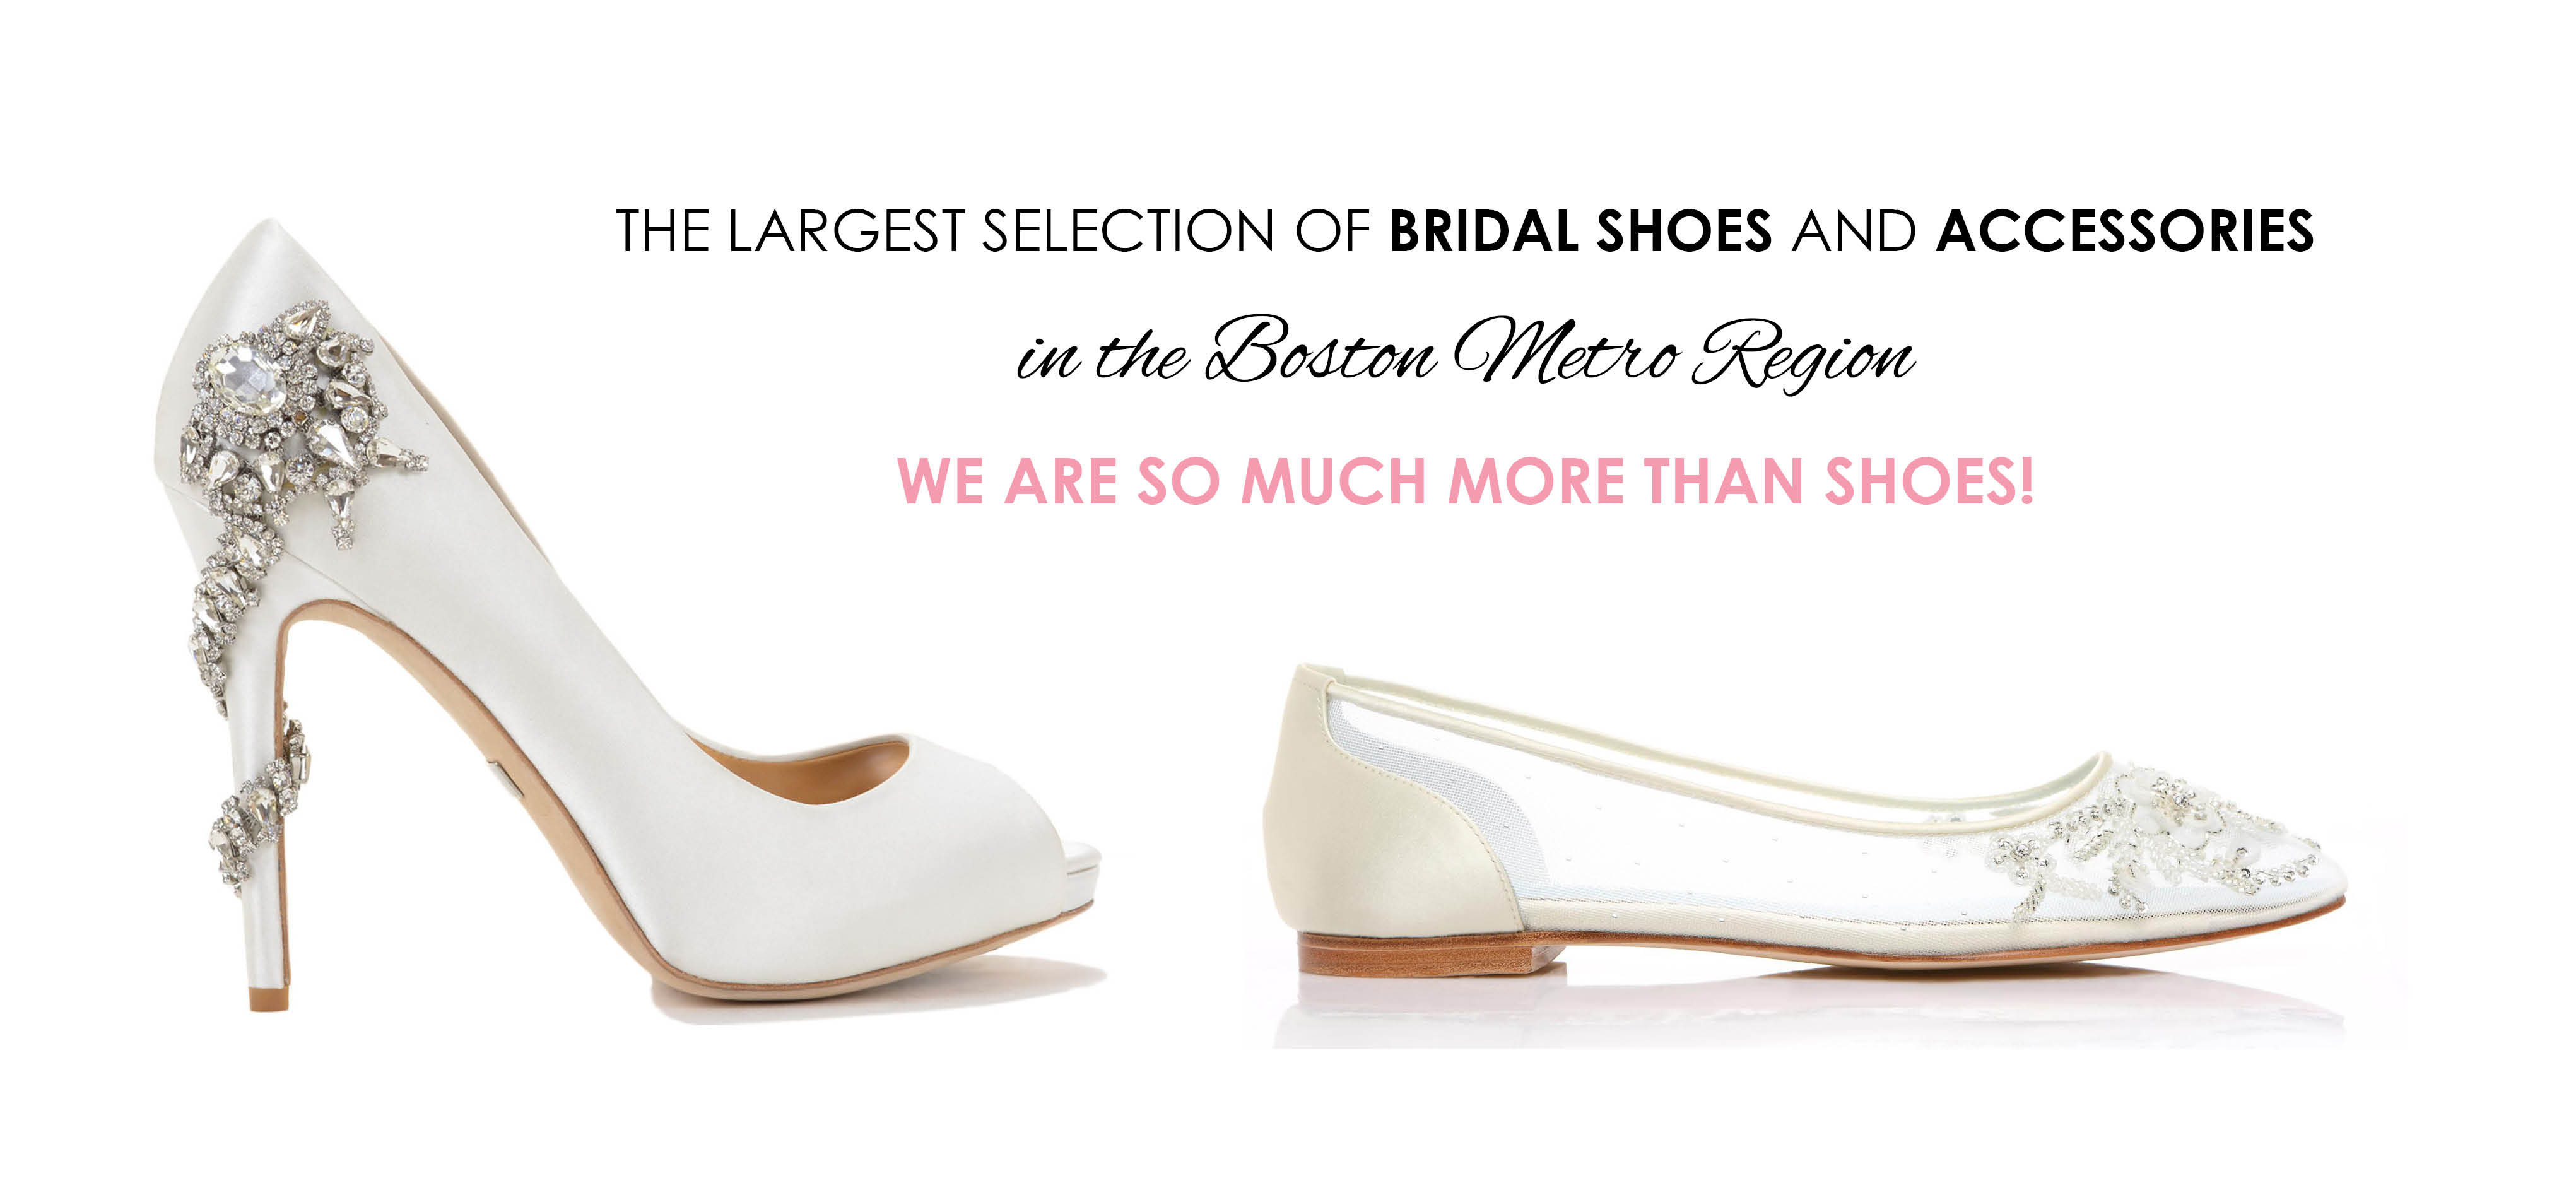 Shoes To Dye For - The largest selection of bridal shoes accessories in the Boston Metro region